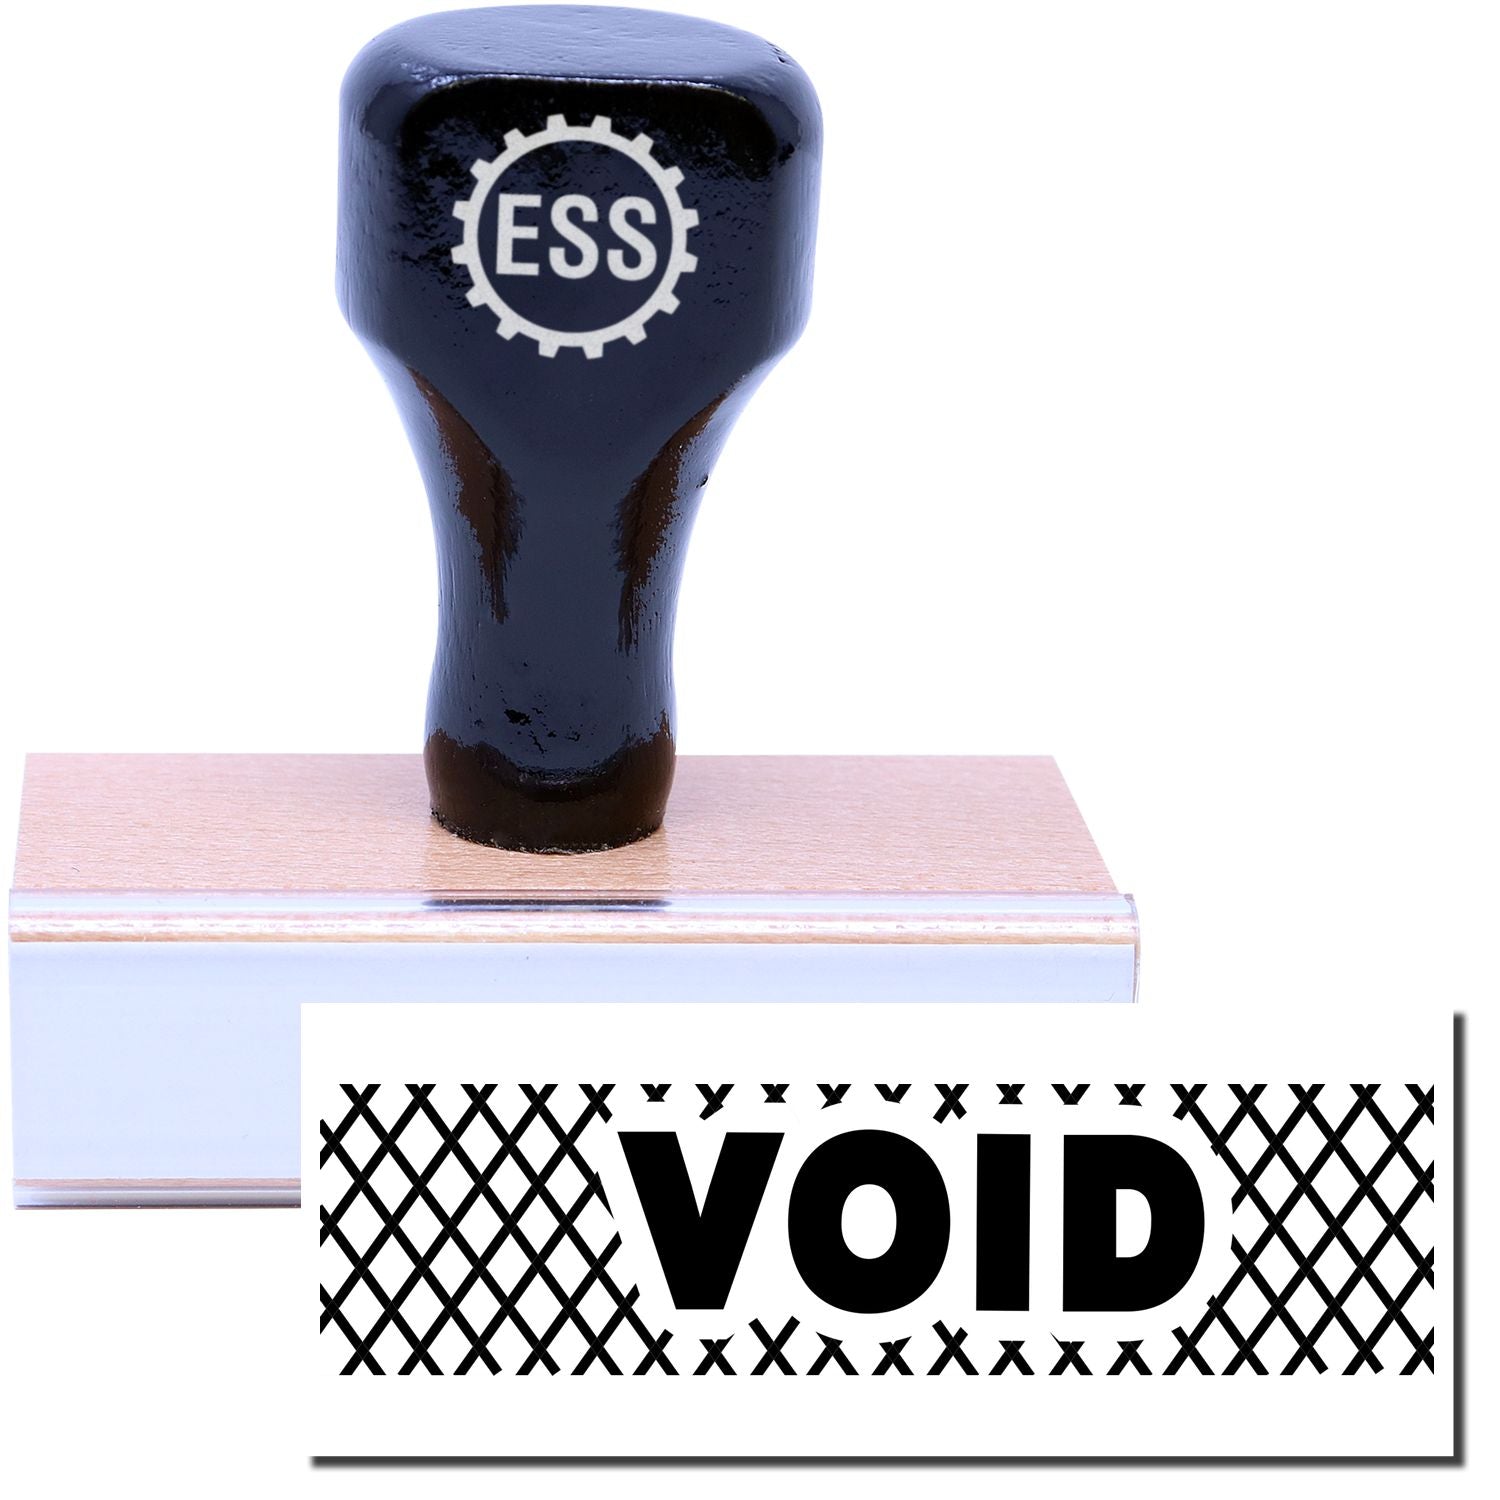 A stock office rubber stamp with a stamped image showing how the text "VOID" with strikelines all around the text is displayed after stamping.